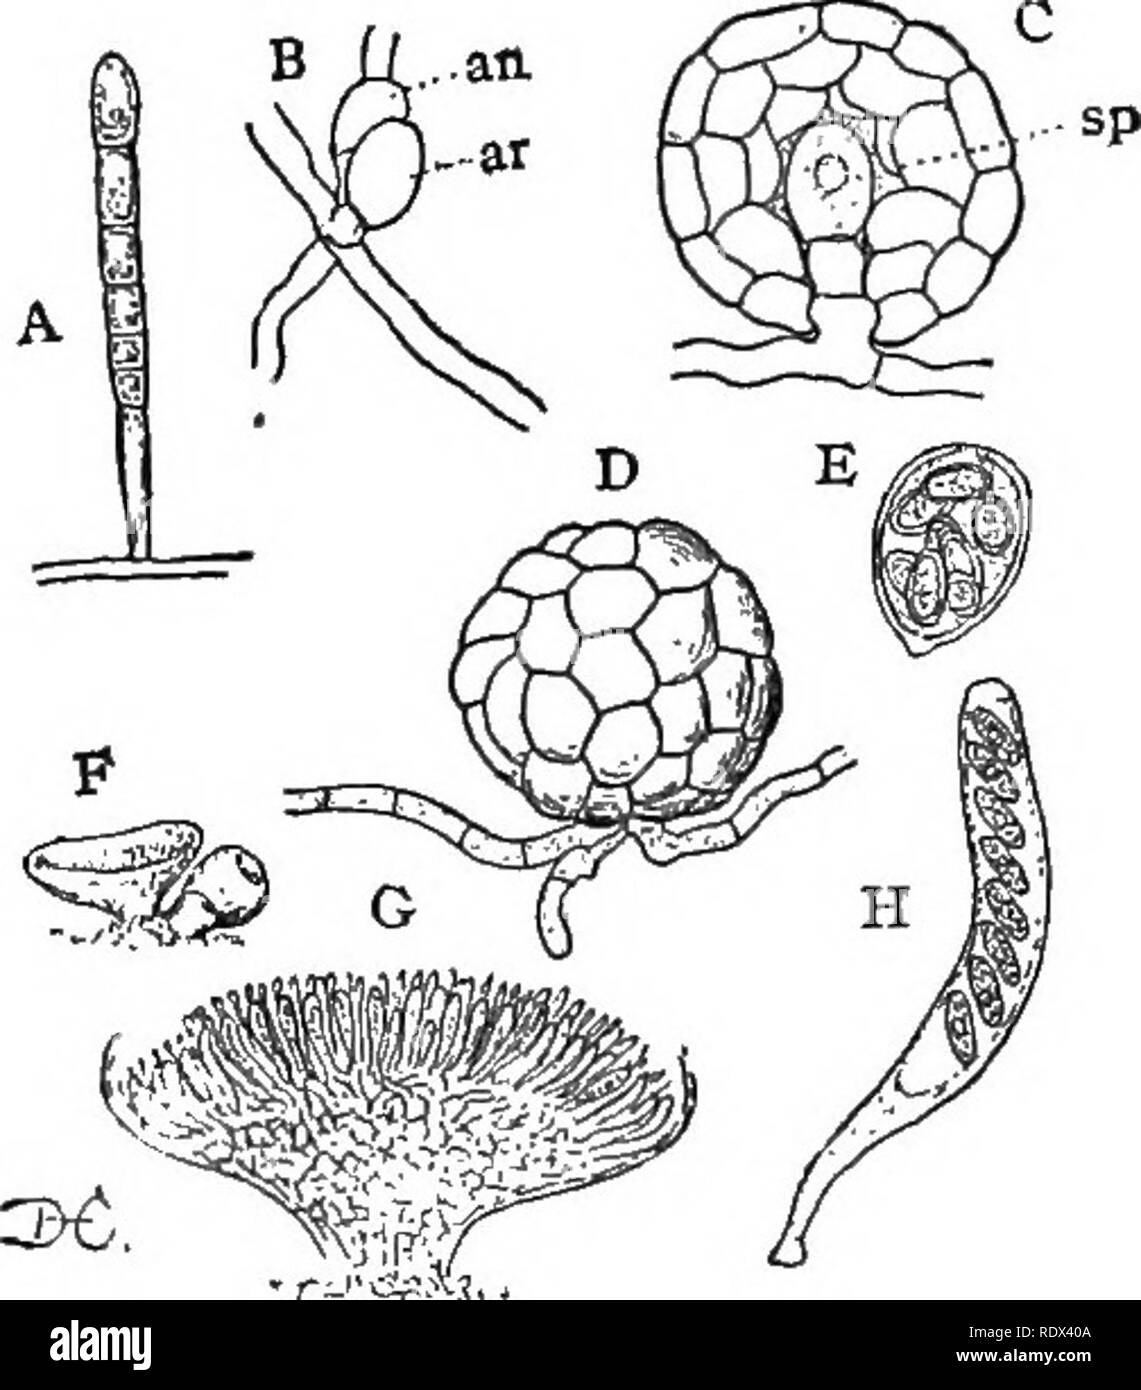 . Lectures on the evolution of plants. Botany; Plants. THE FUNGI 91. arrangement; but in all the higher ones they are borne in definite spore-fruits of characteristic form. This spore- fruit is undoubtedly, in many instances, the result of fertilization, being pro- duced by the formation of a peculiar cell, the archi- carp, which corresponds to the oogonium of the Phy- comycetes. This is usually fertilized by direct contact with the antheridium, and from it, more or less di- rectly, are produced the spore-sacs or asci. A good example of these simpler Ascomycetes is offered by the mildews which Stock Photo